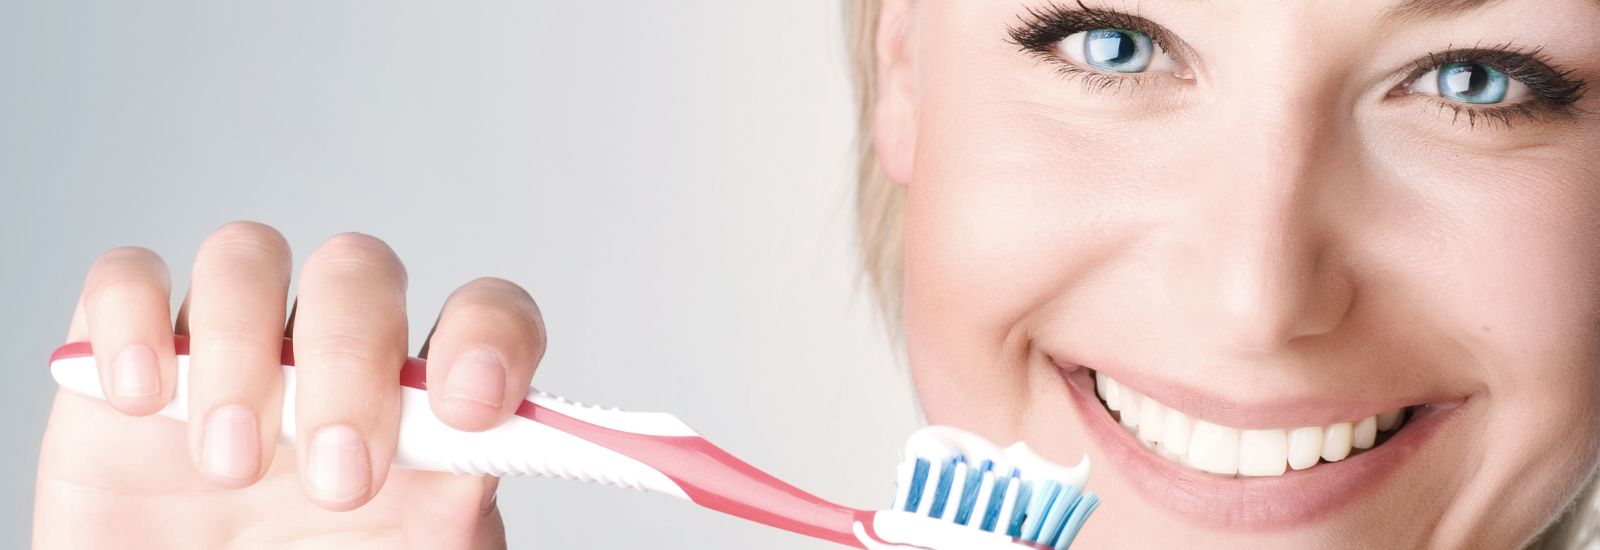 Beautiful woman holding a tooth brush